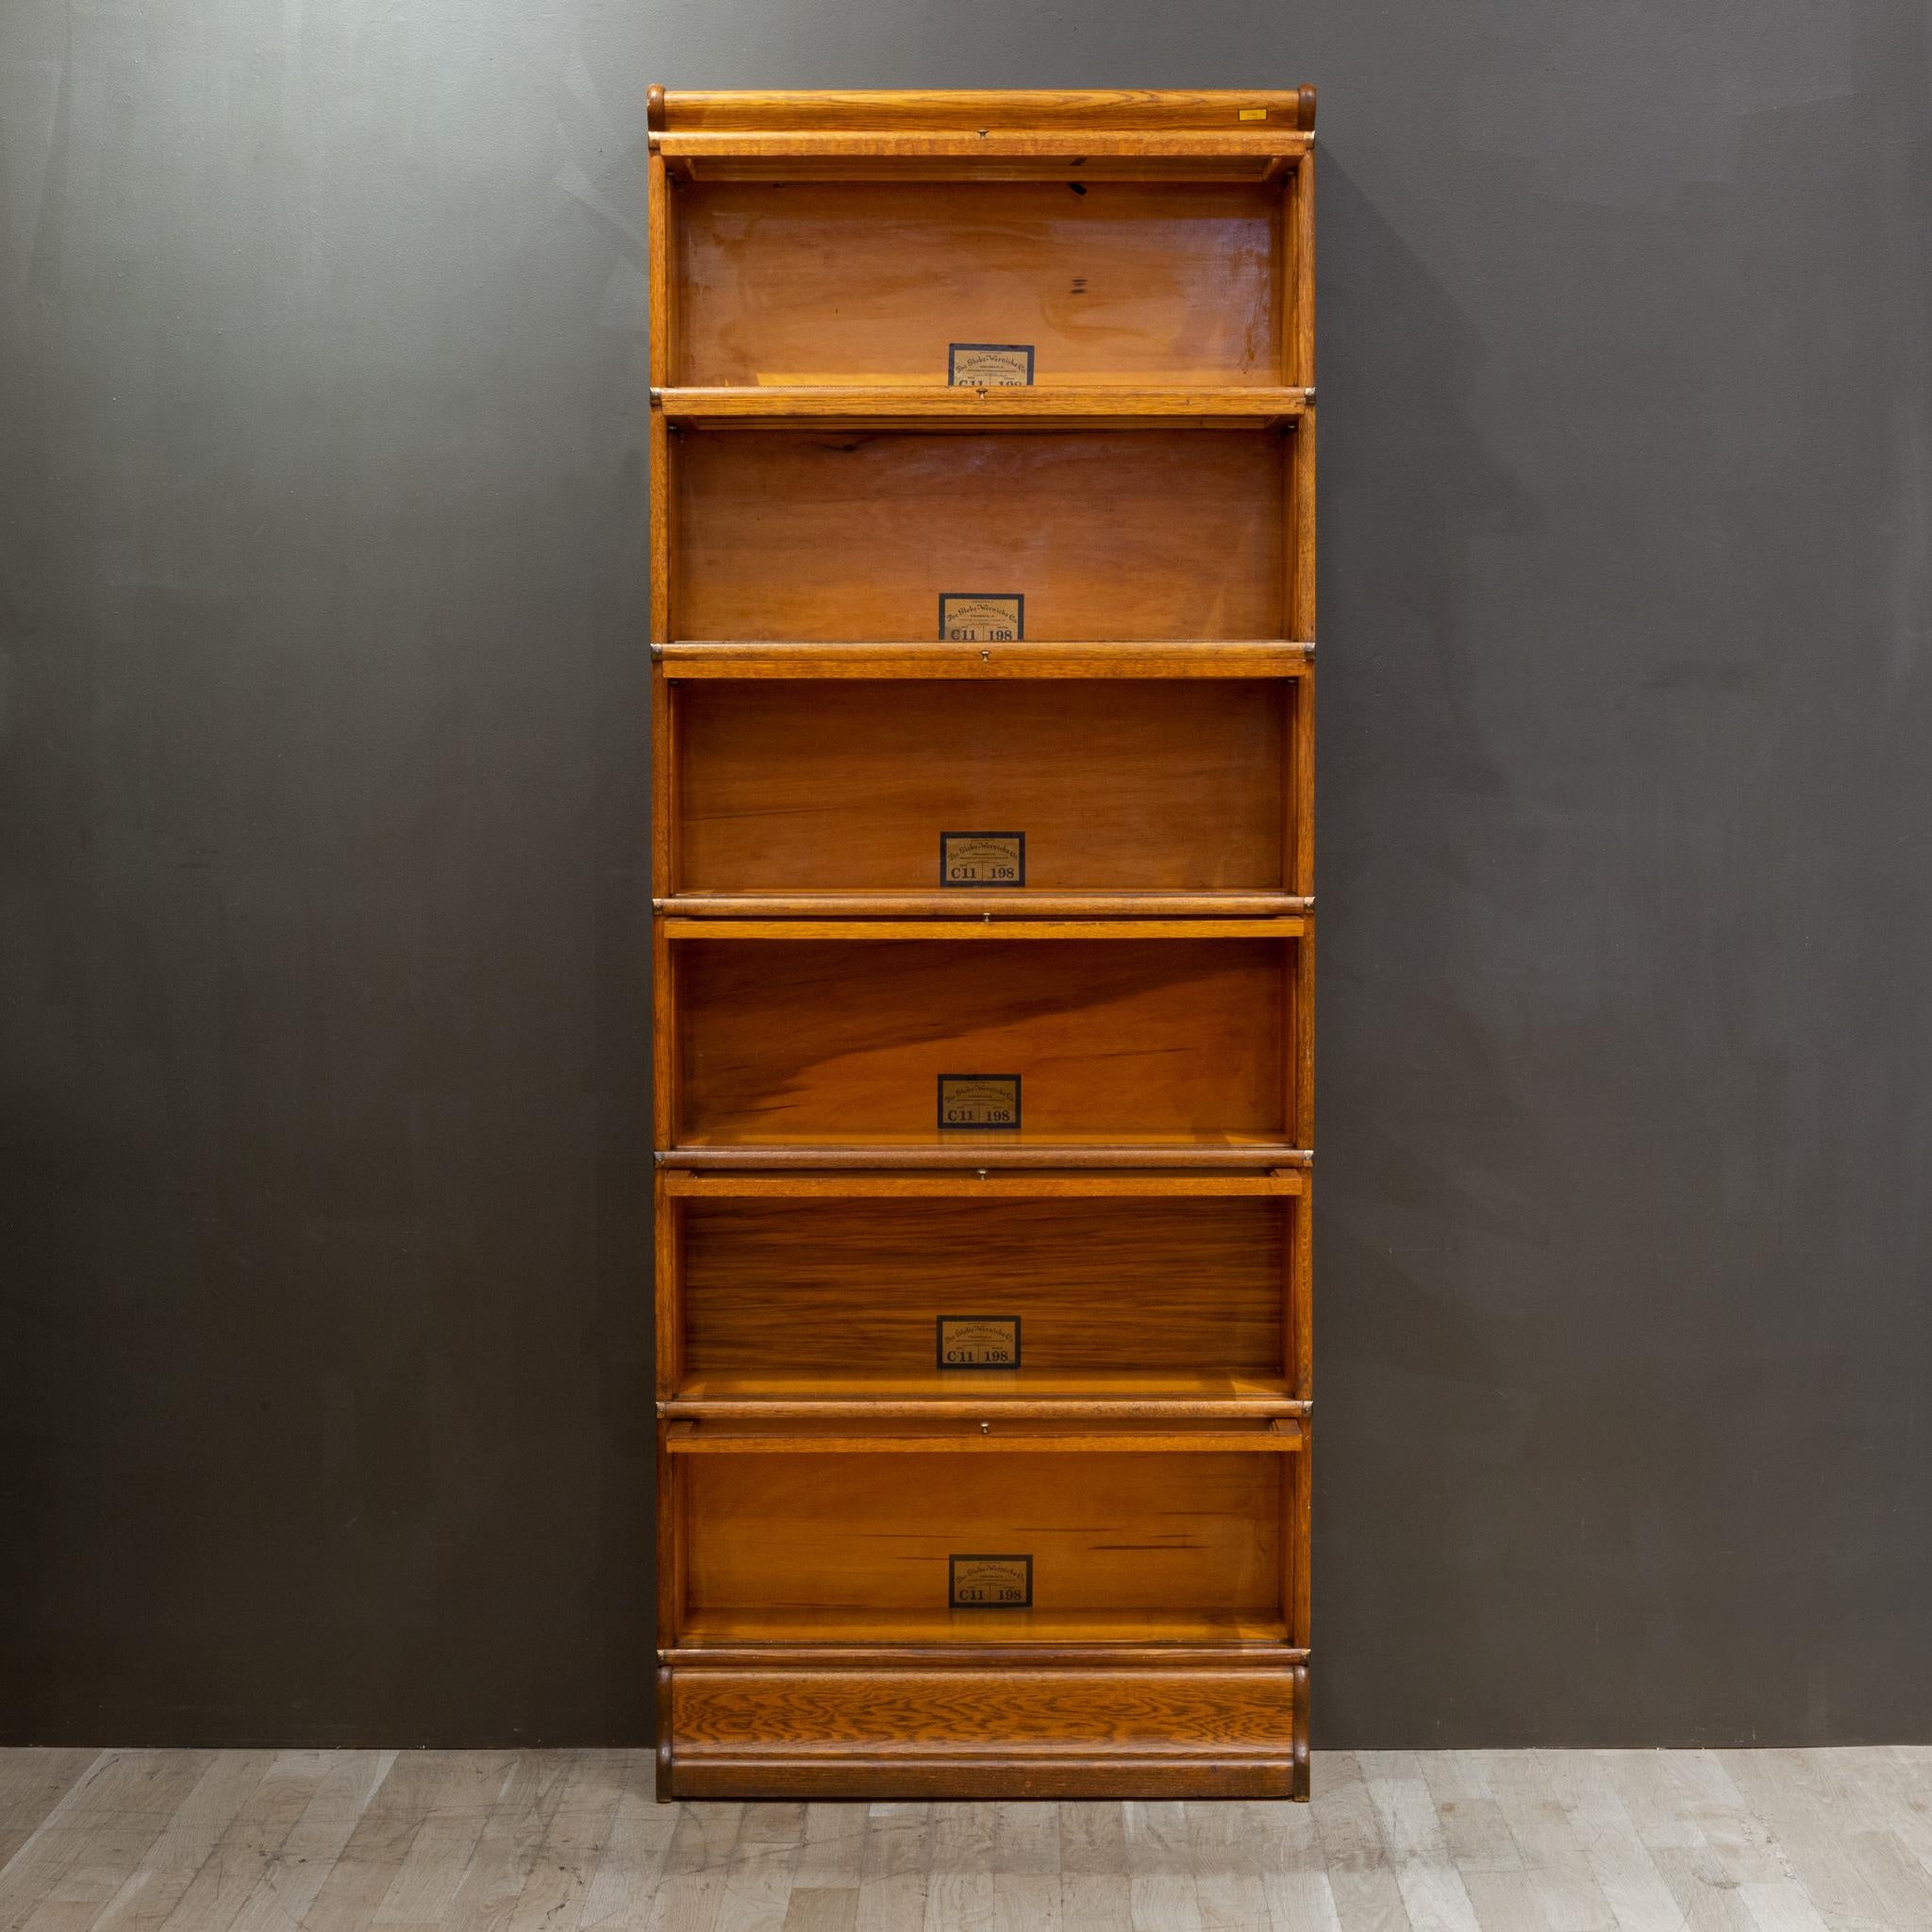 Late Victorian Early 20th C. Globe-Wernicke Quarter Sawn 6 Stack Lawyer's Bookcase, C.1910